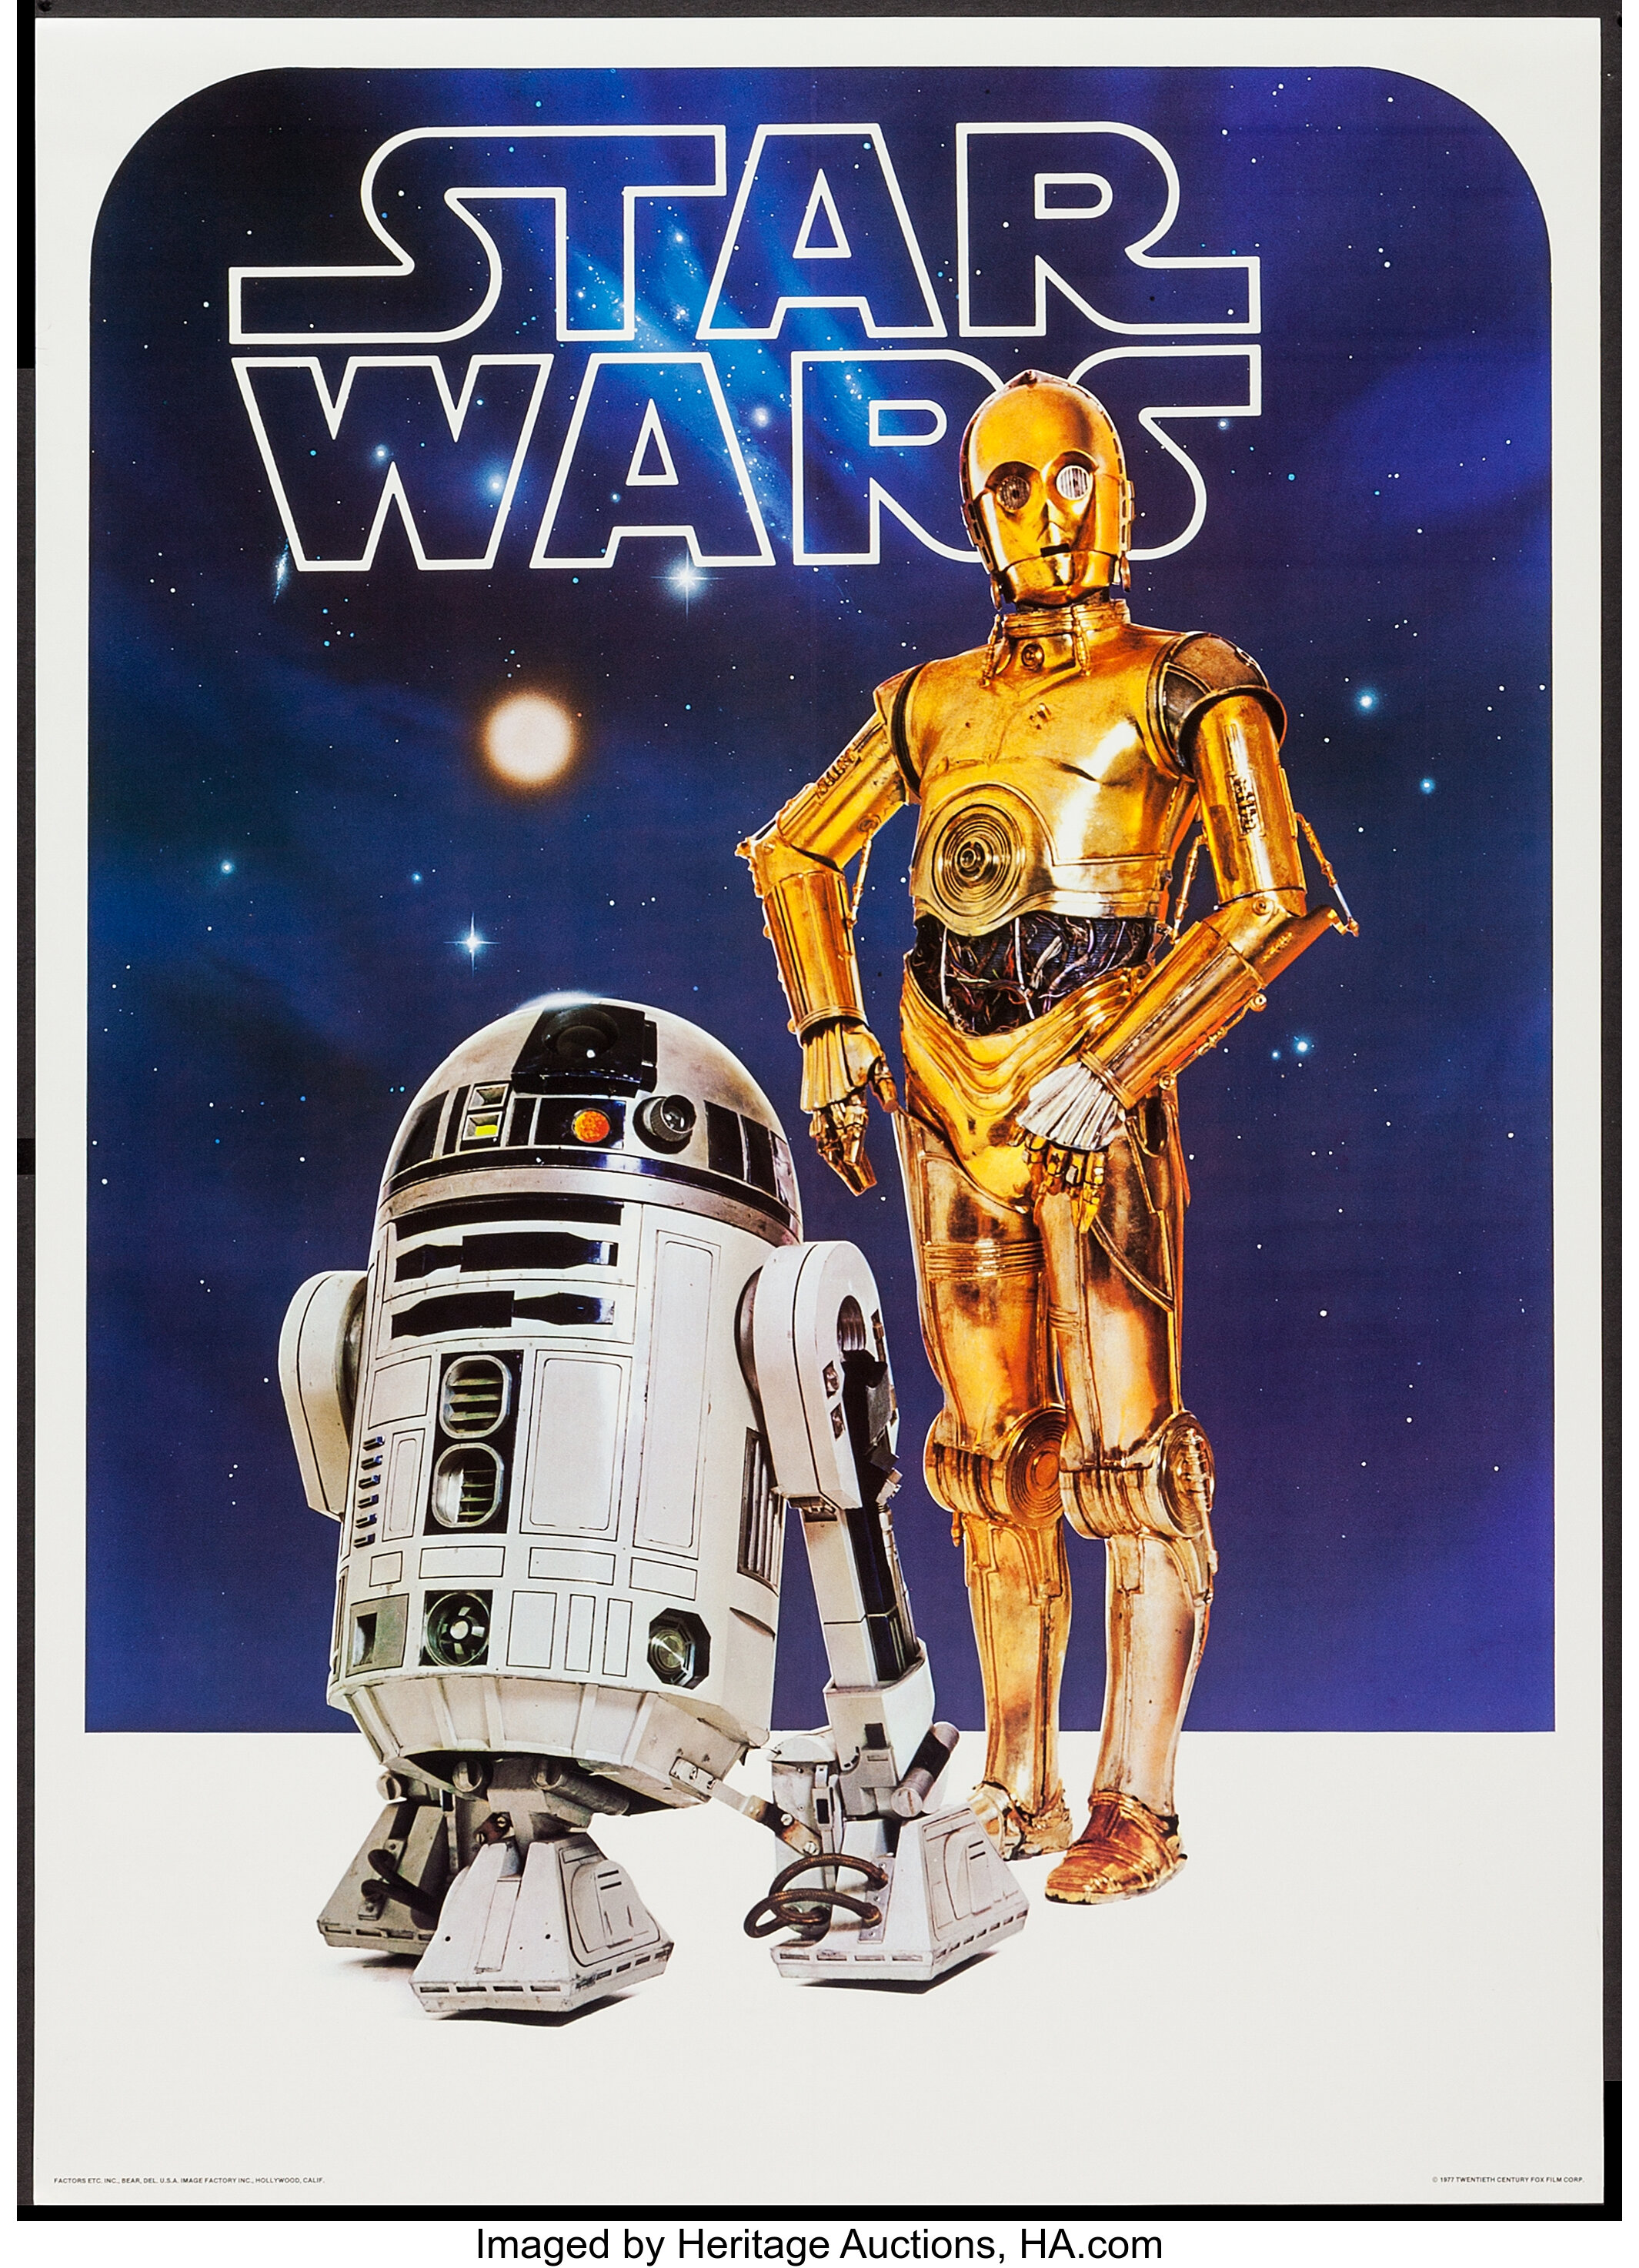 C 3po And R2 D2 From Star Wars Image Factory 1977 Poster 20 X Lot 53411 Heritage Auctions 